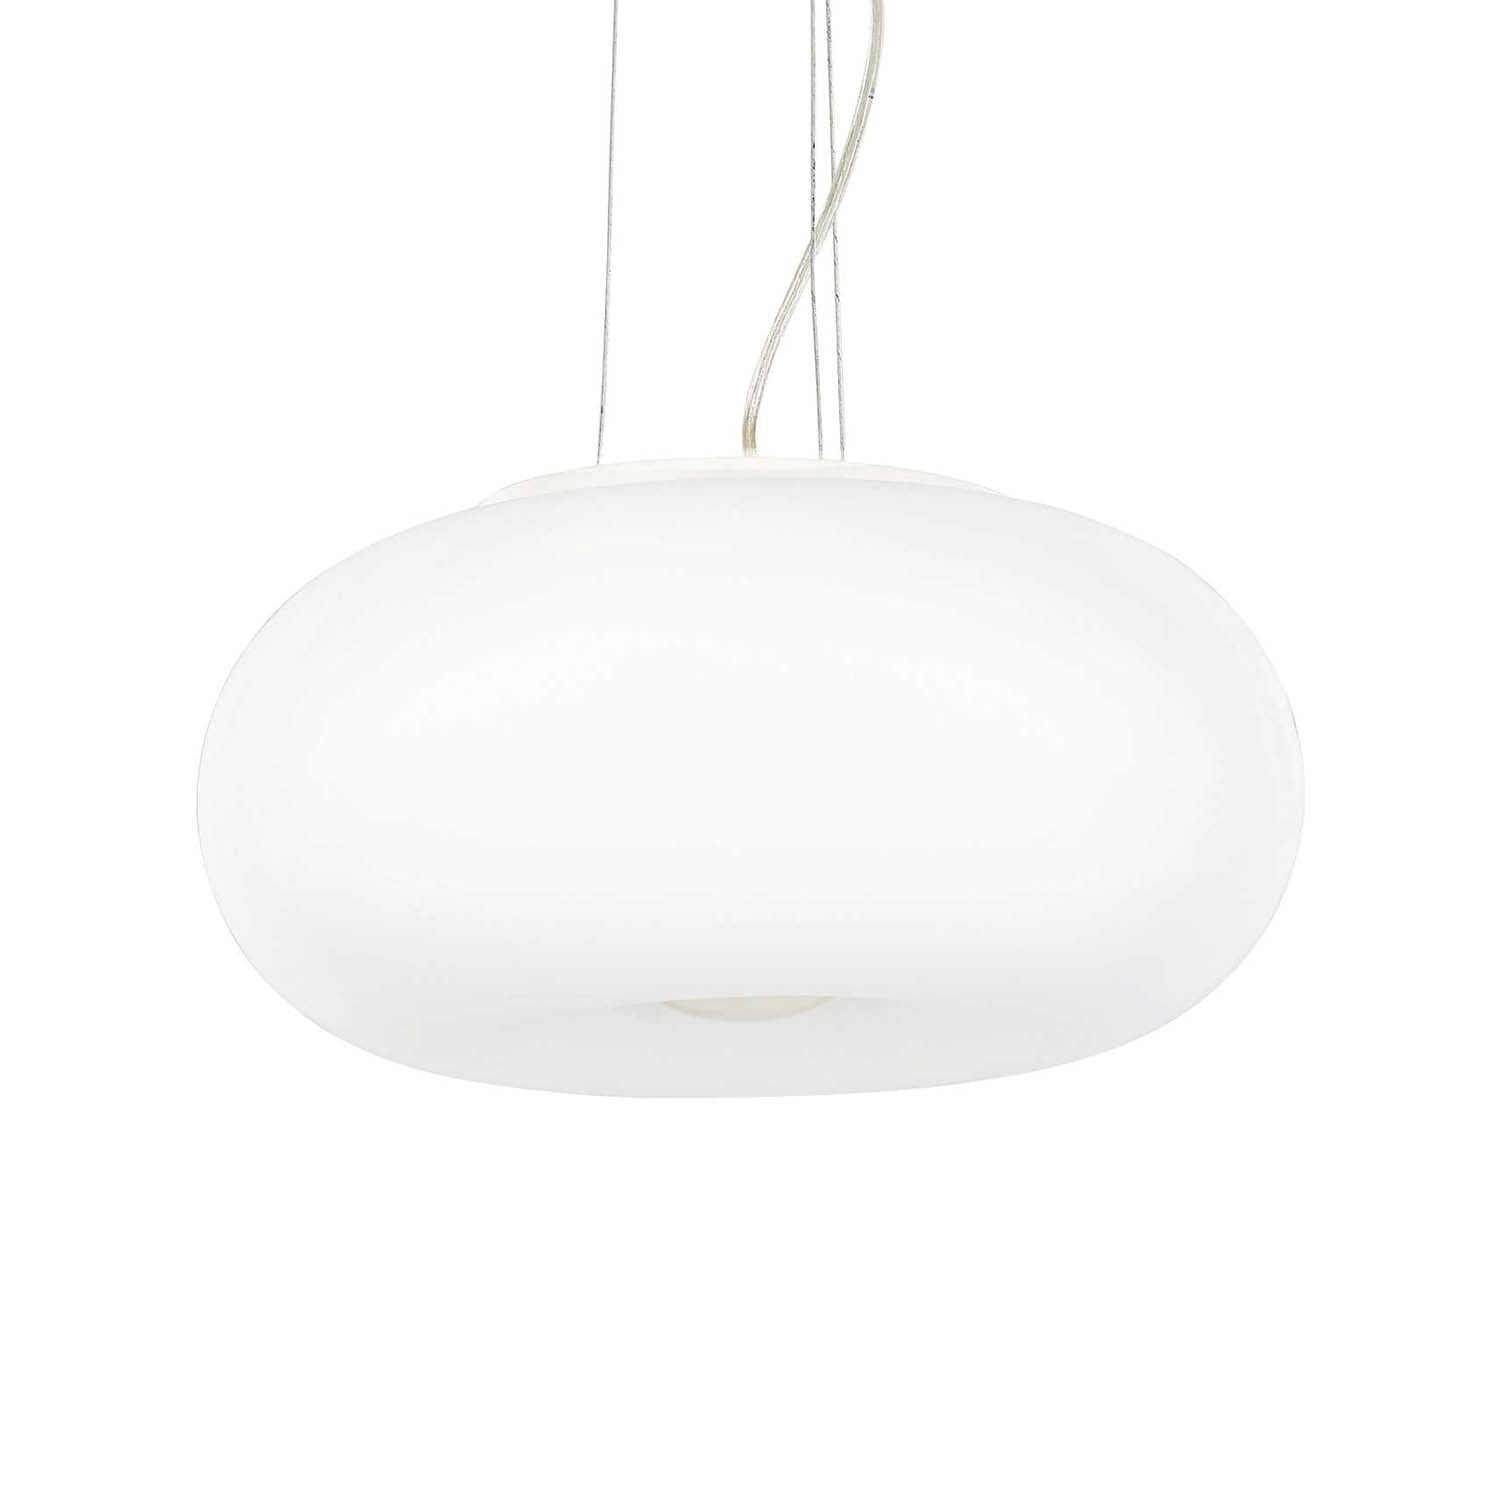 ULISSE - Donut pendant light in white opaque glass